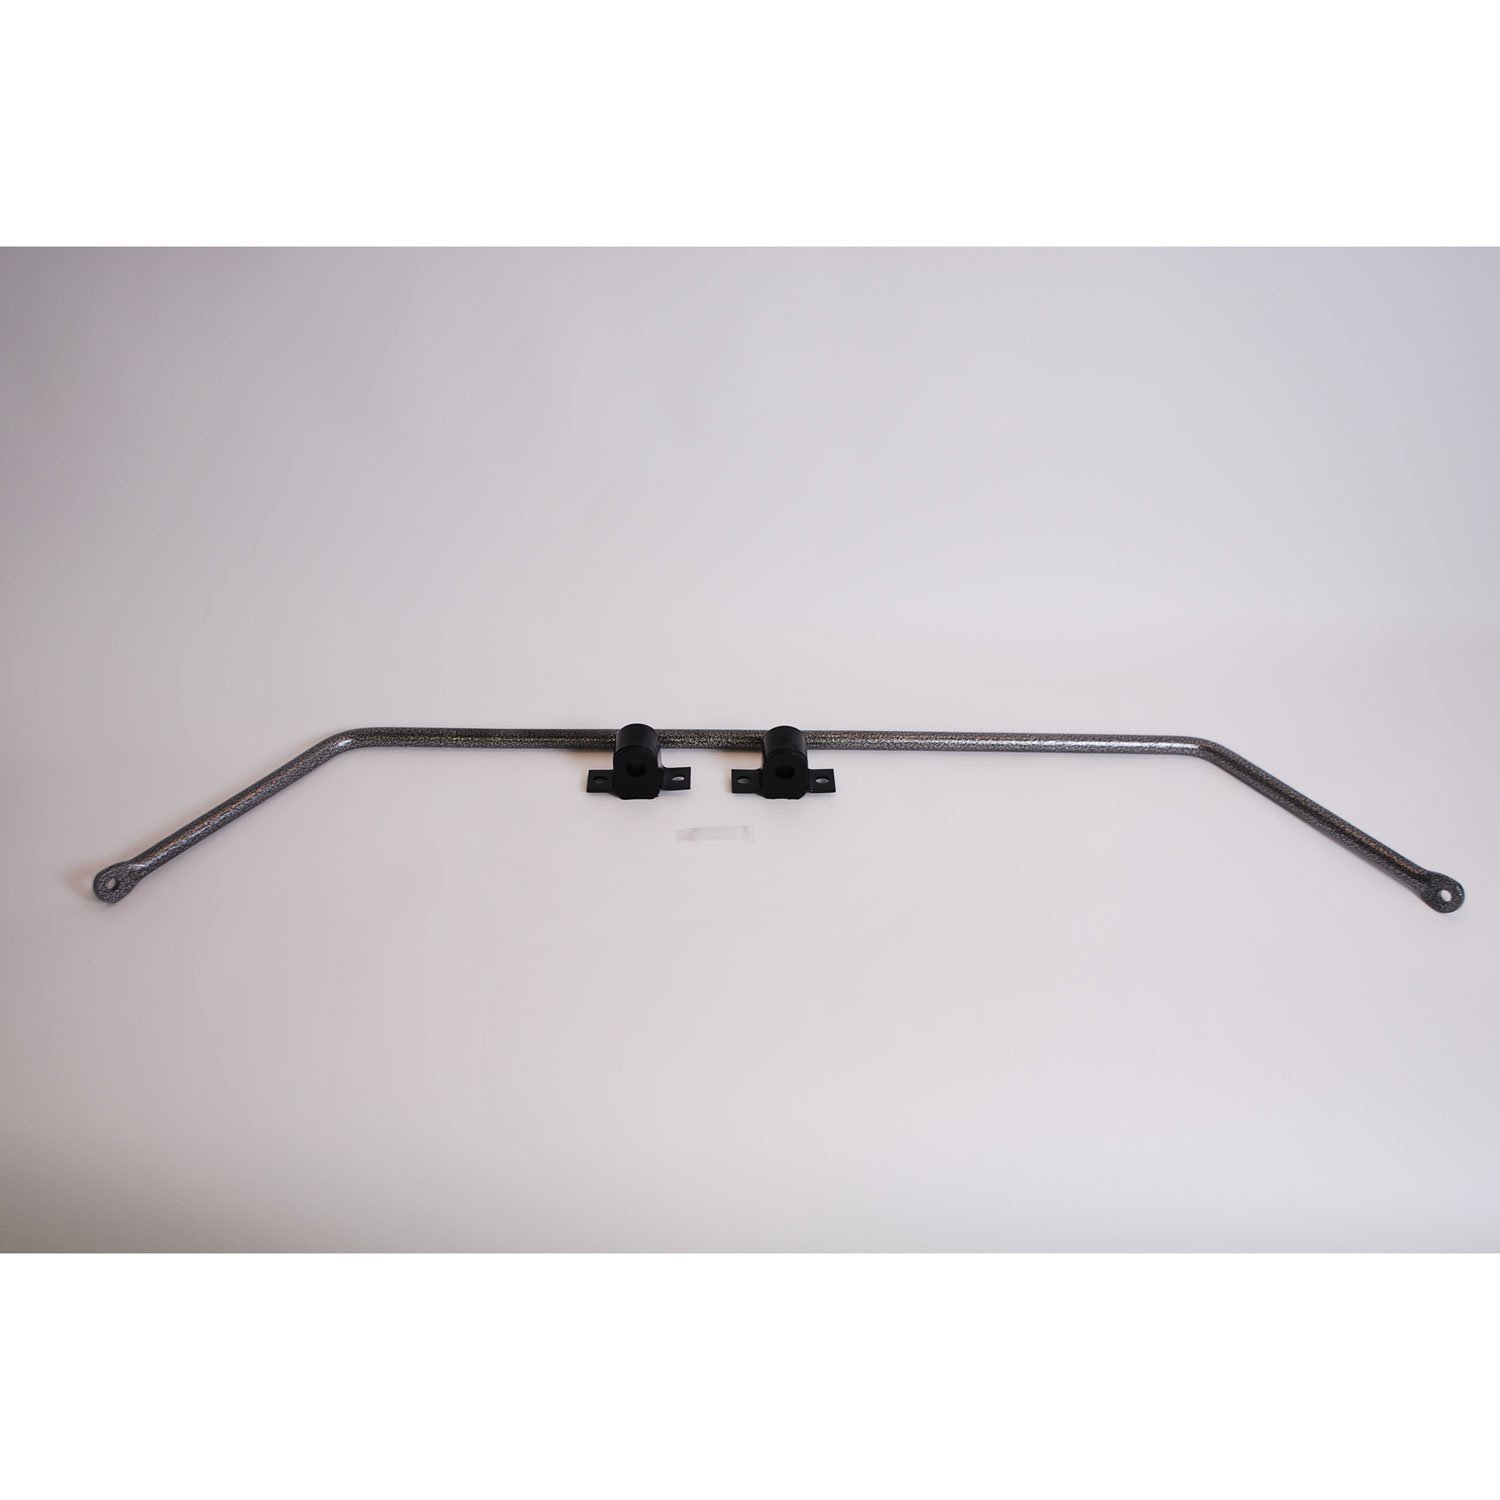 Rear Sway Bar for 2007-2016 Ford Expedition and Lincoln Navigator 2/4WD